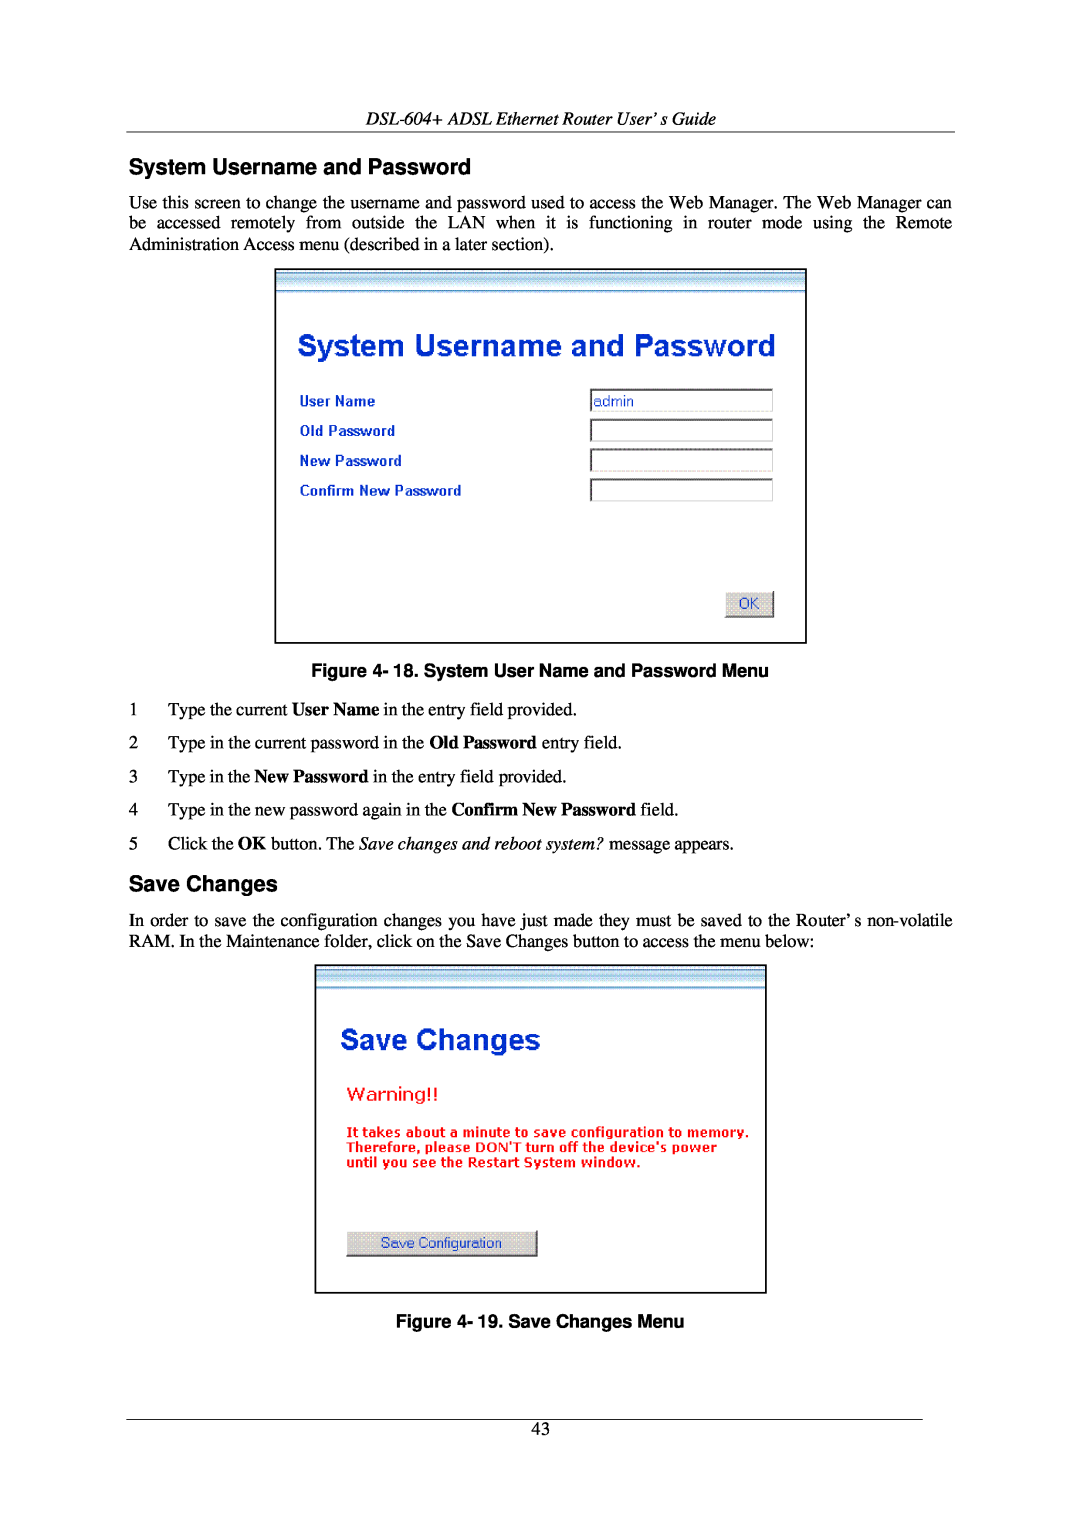 D-Link manual System Username and Password, DSL-604+ ADSL Ethernet Router User’s Guide, 19. Save Changes Menu 